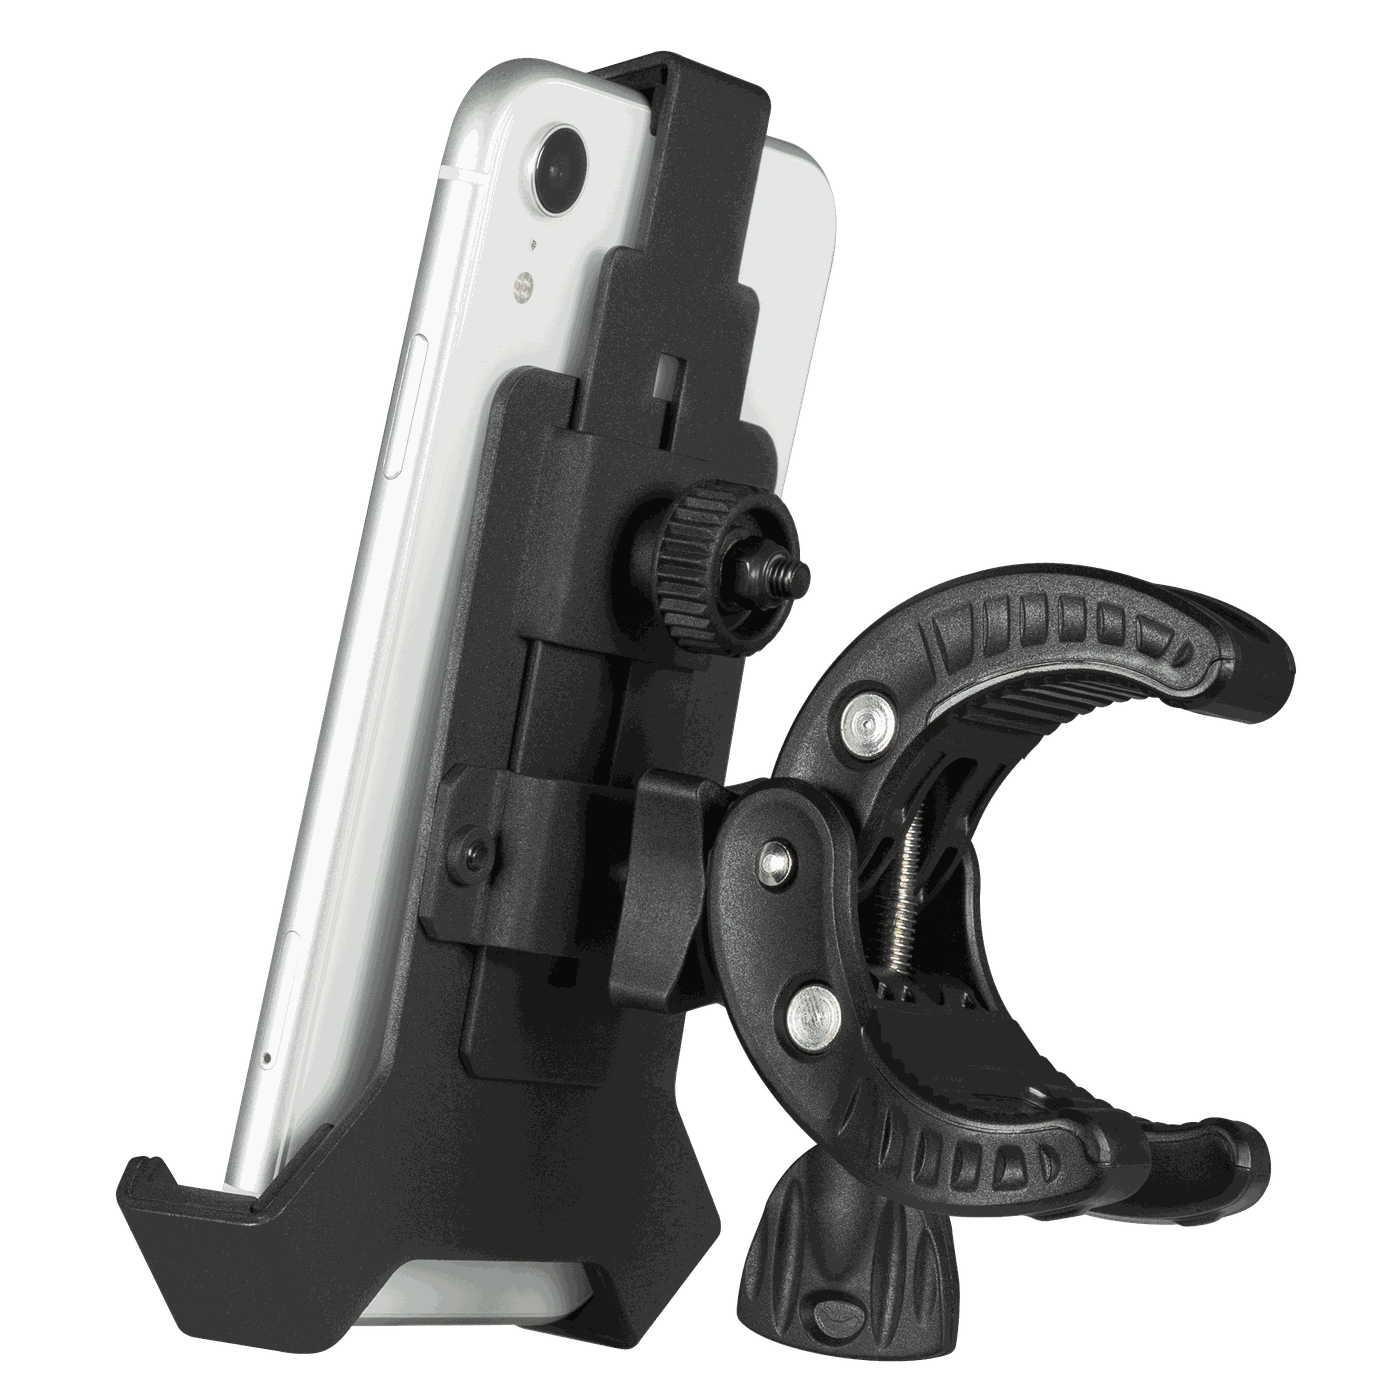 Mob Mount Switch Claw holding phone